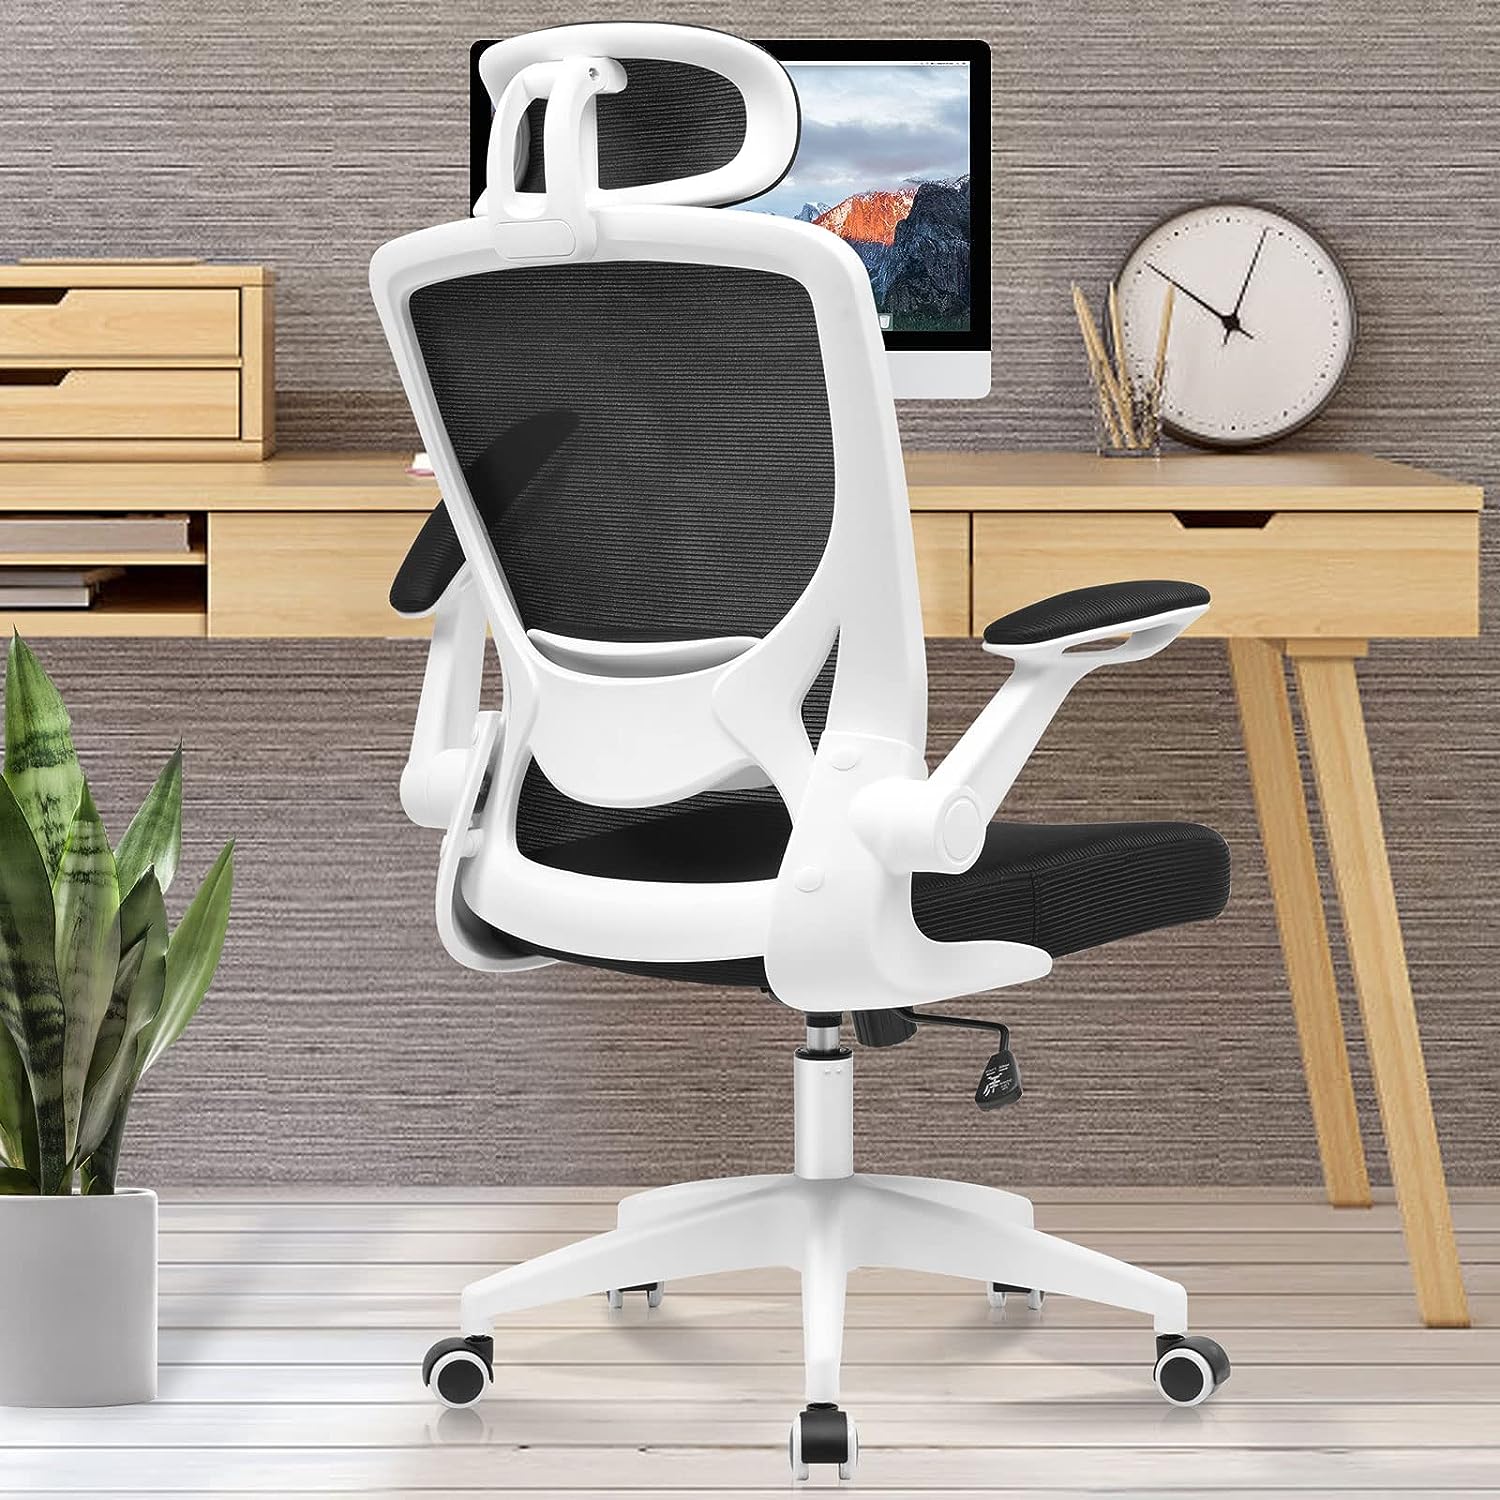 Ergonomic Office Chair – Enhance Comfort and Support with the KERDOM Chair